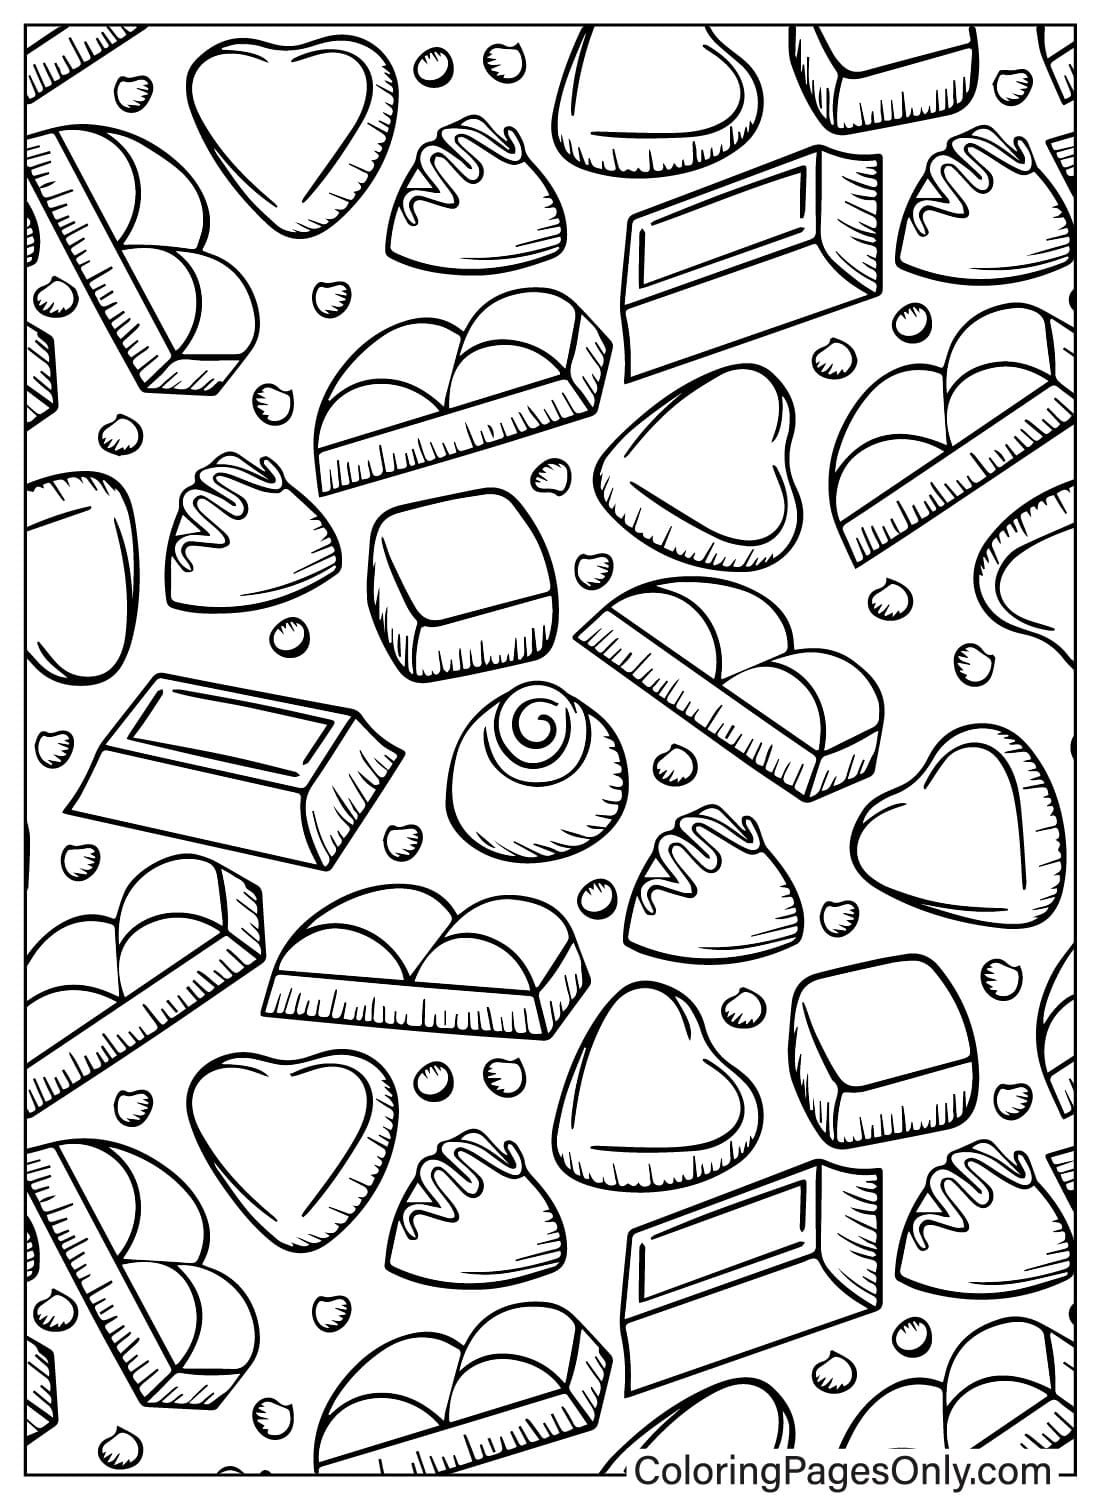 Chocolate Pattern Coloring Page from Chocolate